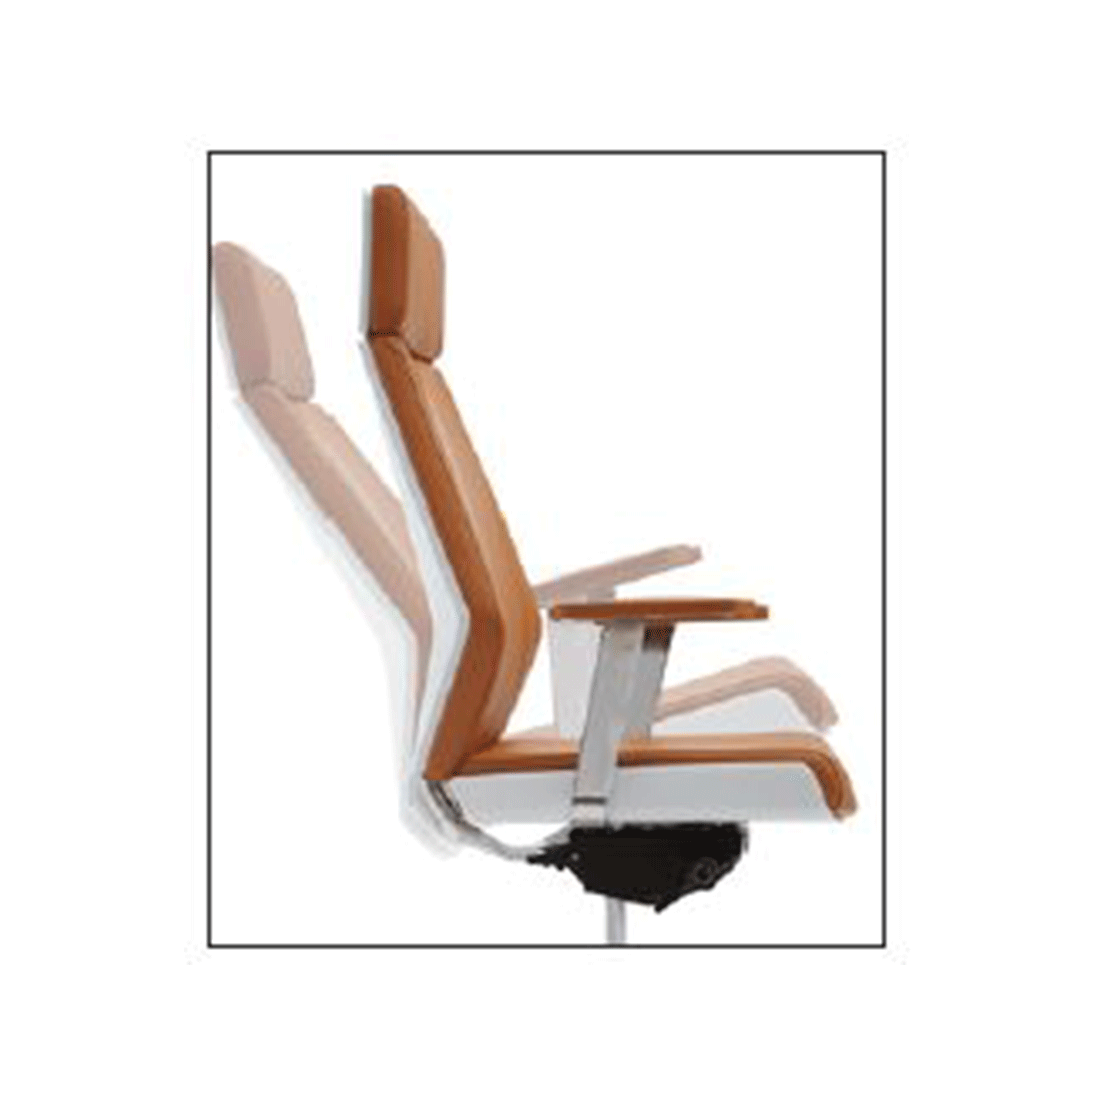 Executor IV Leather Chair - switchoffice.com.au